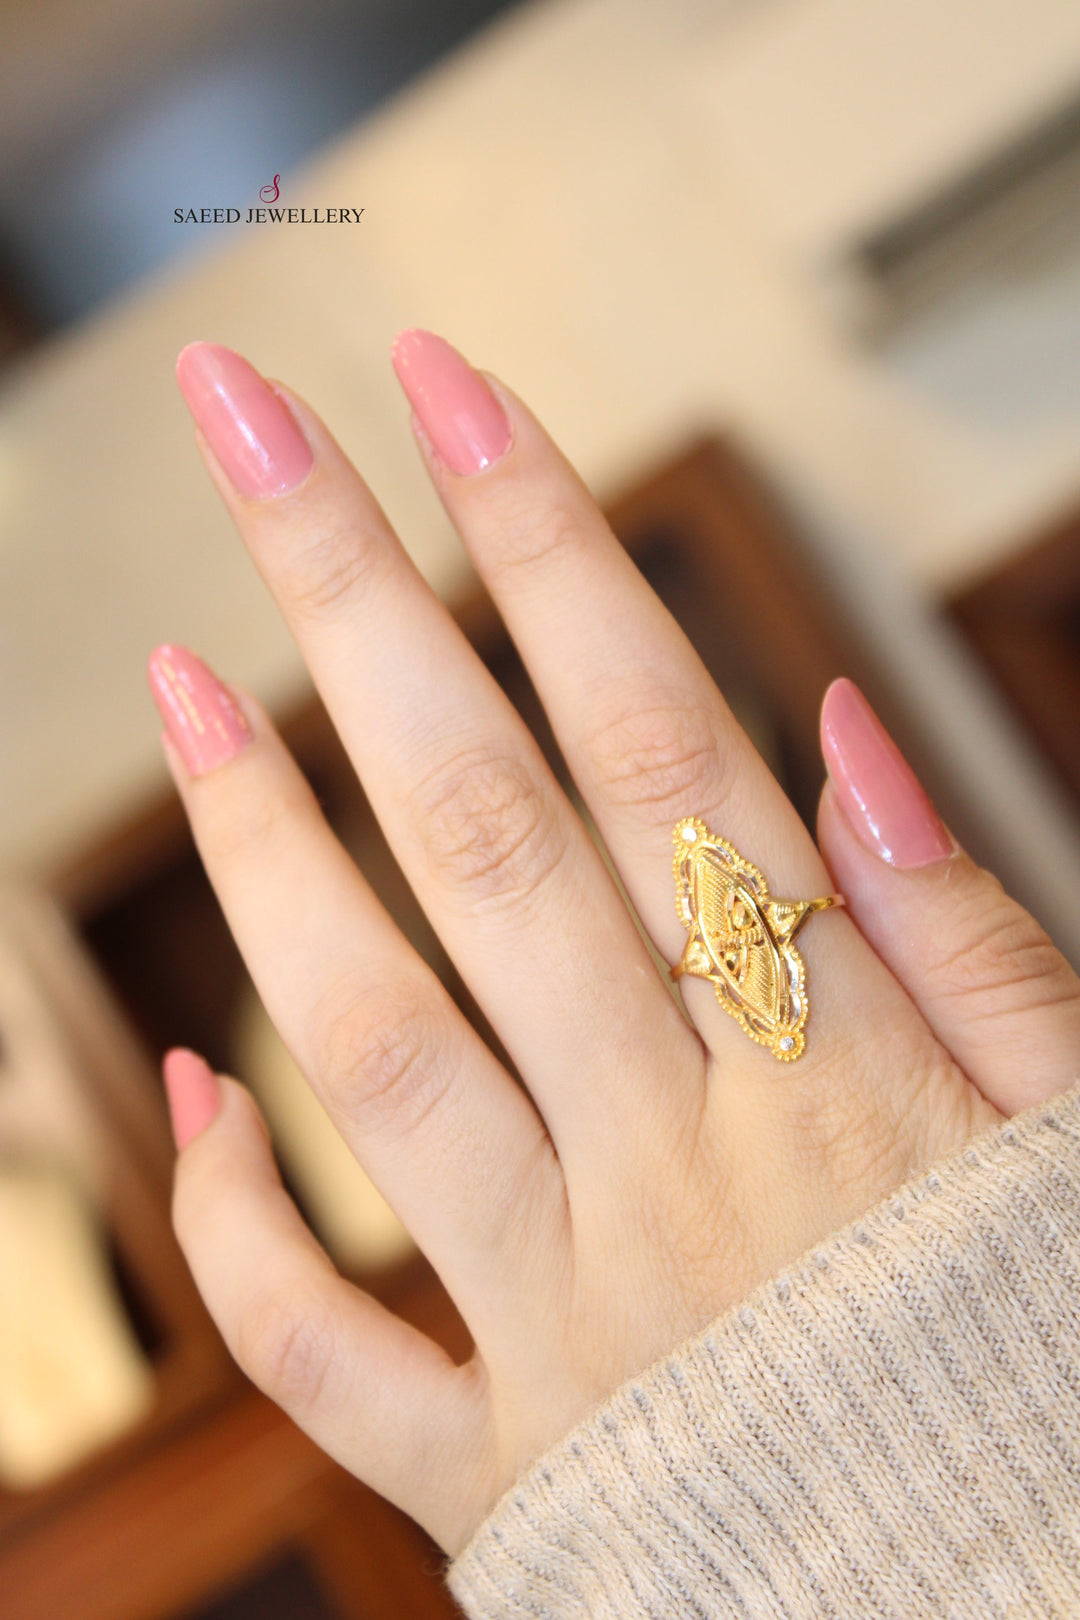 21K Gold Indian Ring by Saeed Jewelry - Image 2